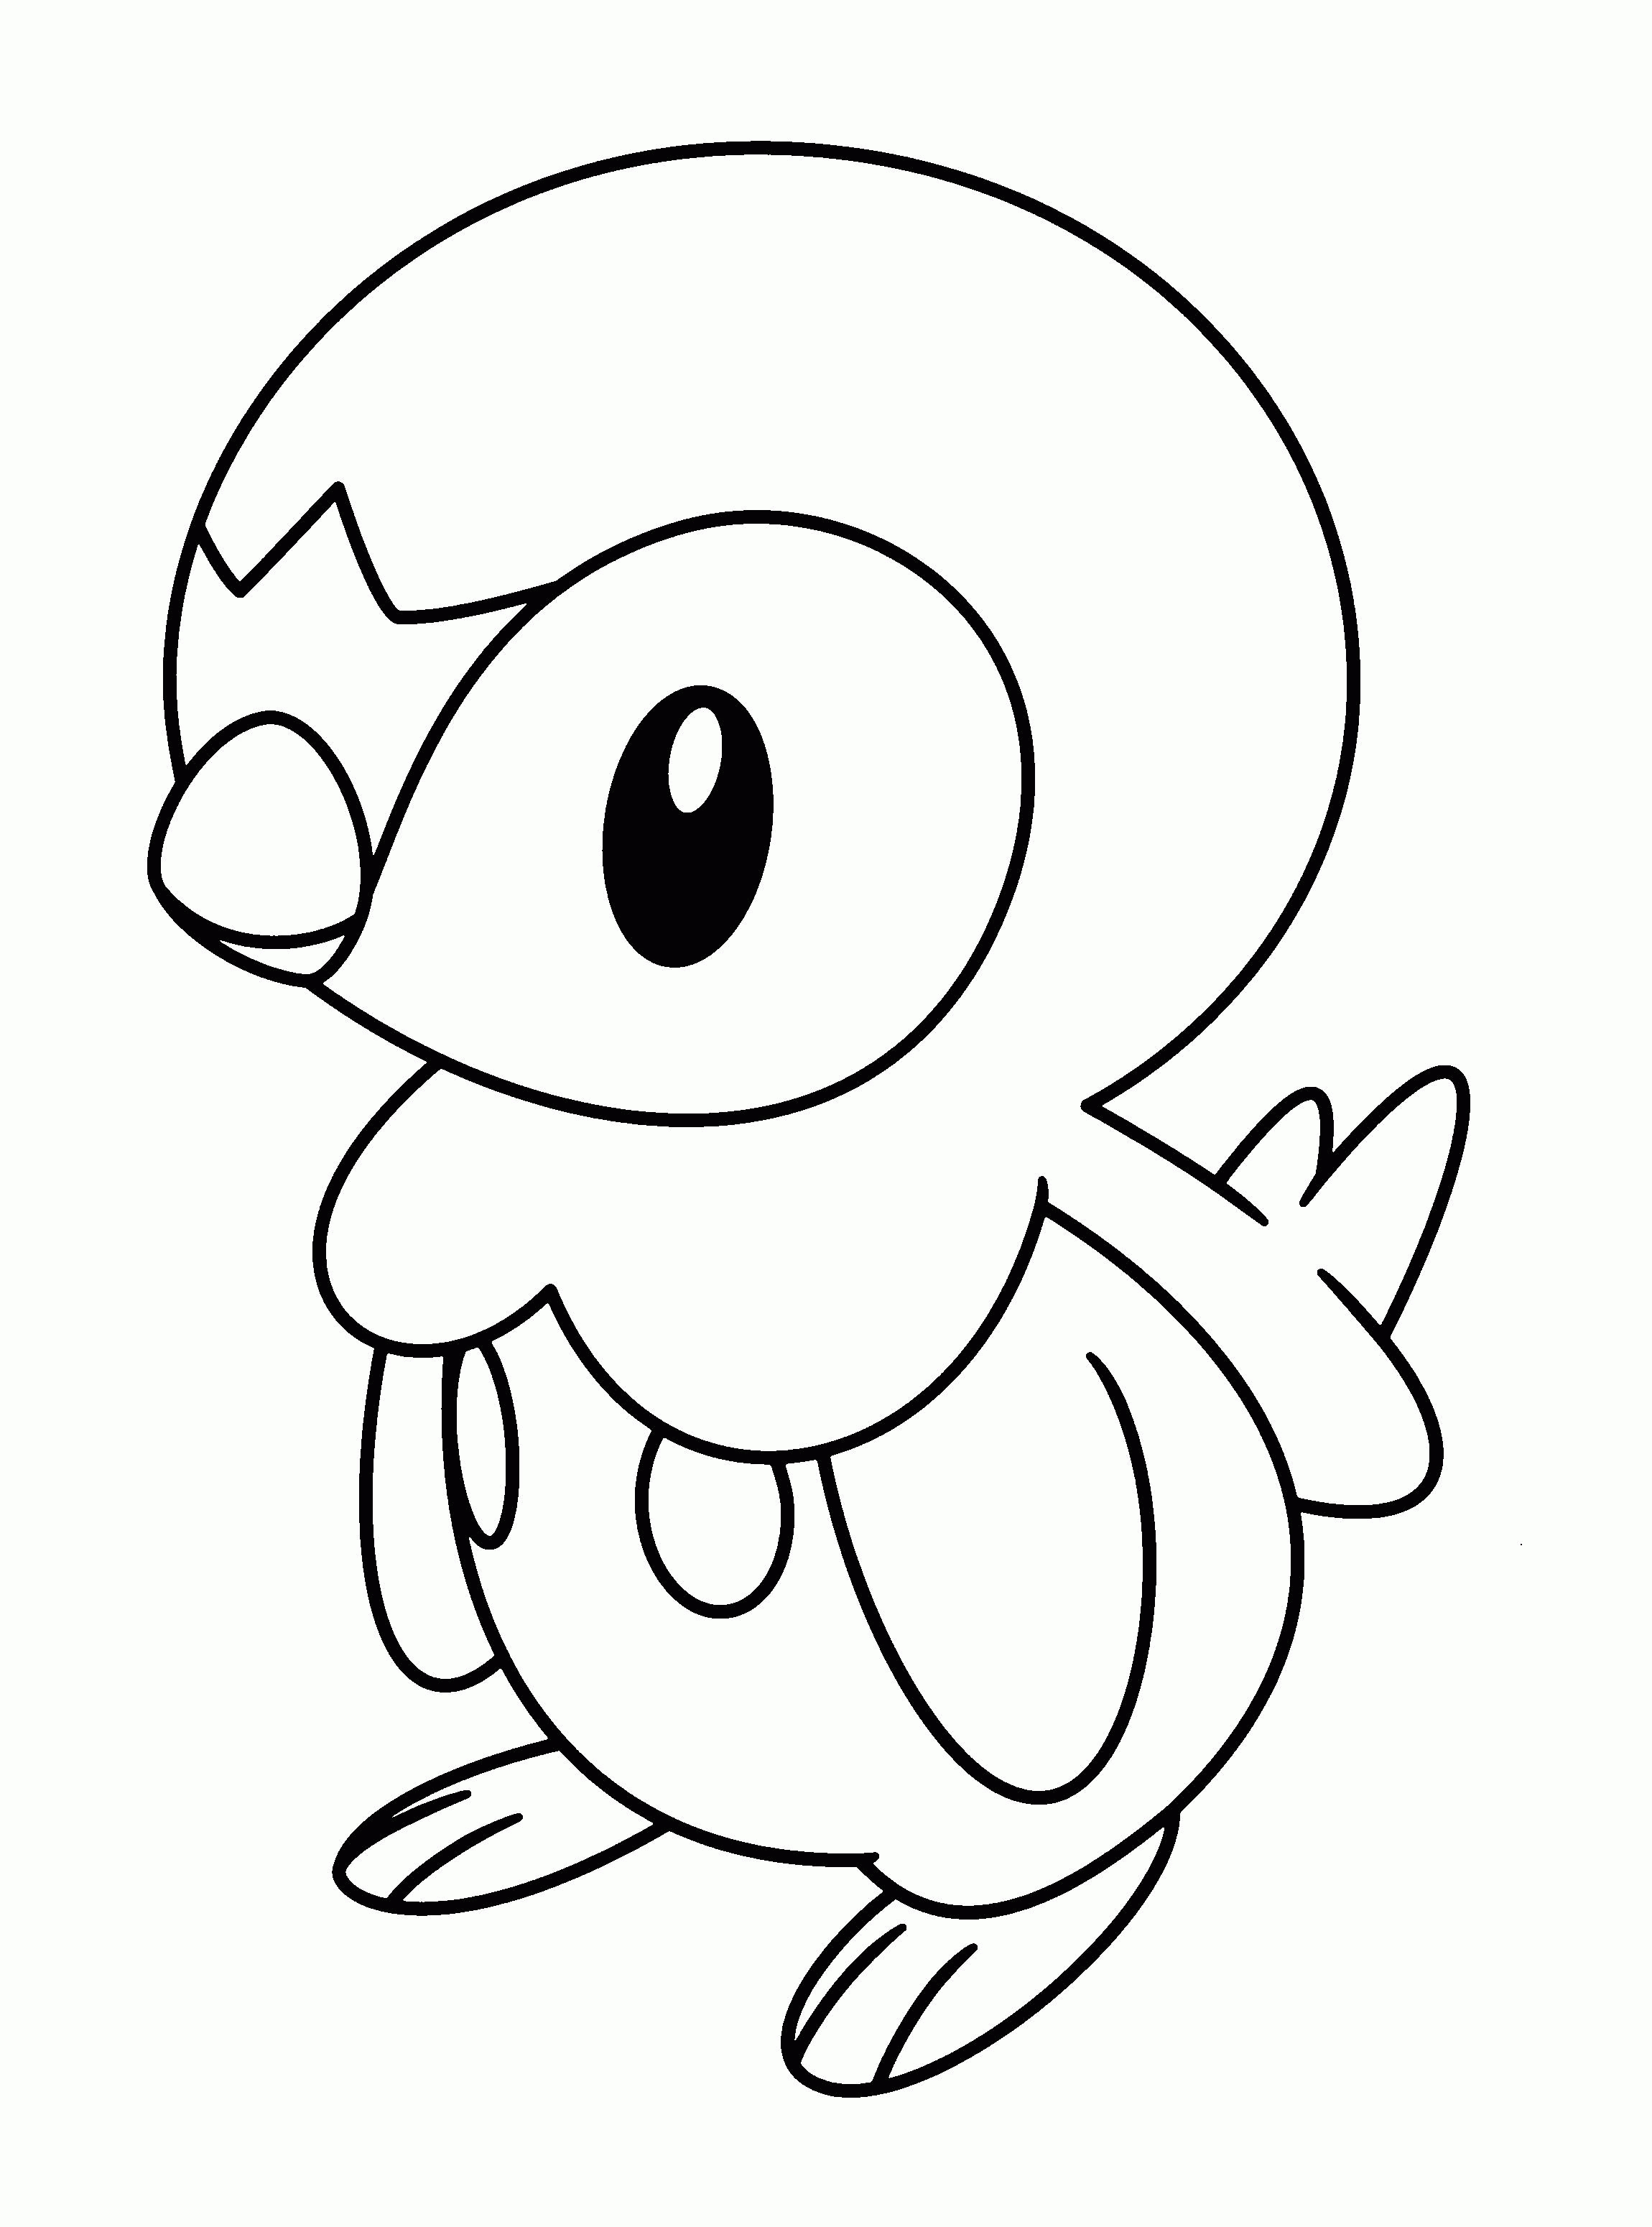 Poochyena Coloring Pages Pokemon Coloring Pages Xy Free Download Best Pokemon Coloring